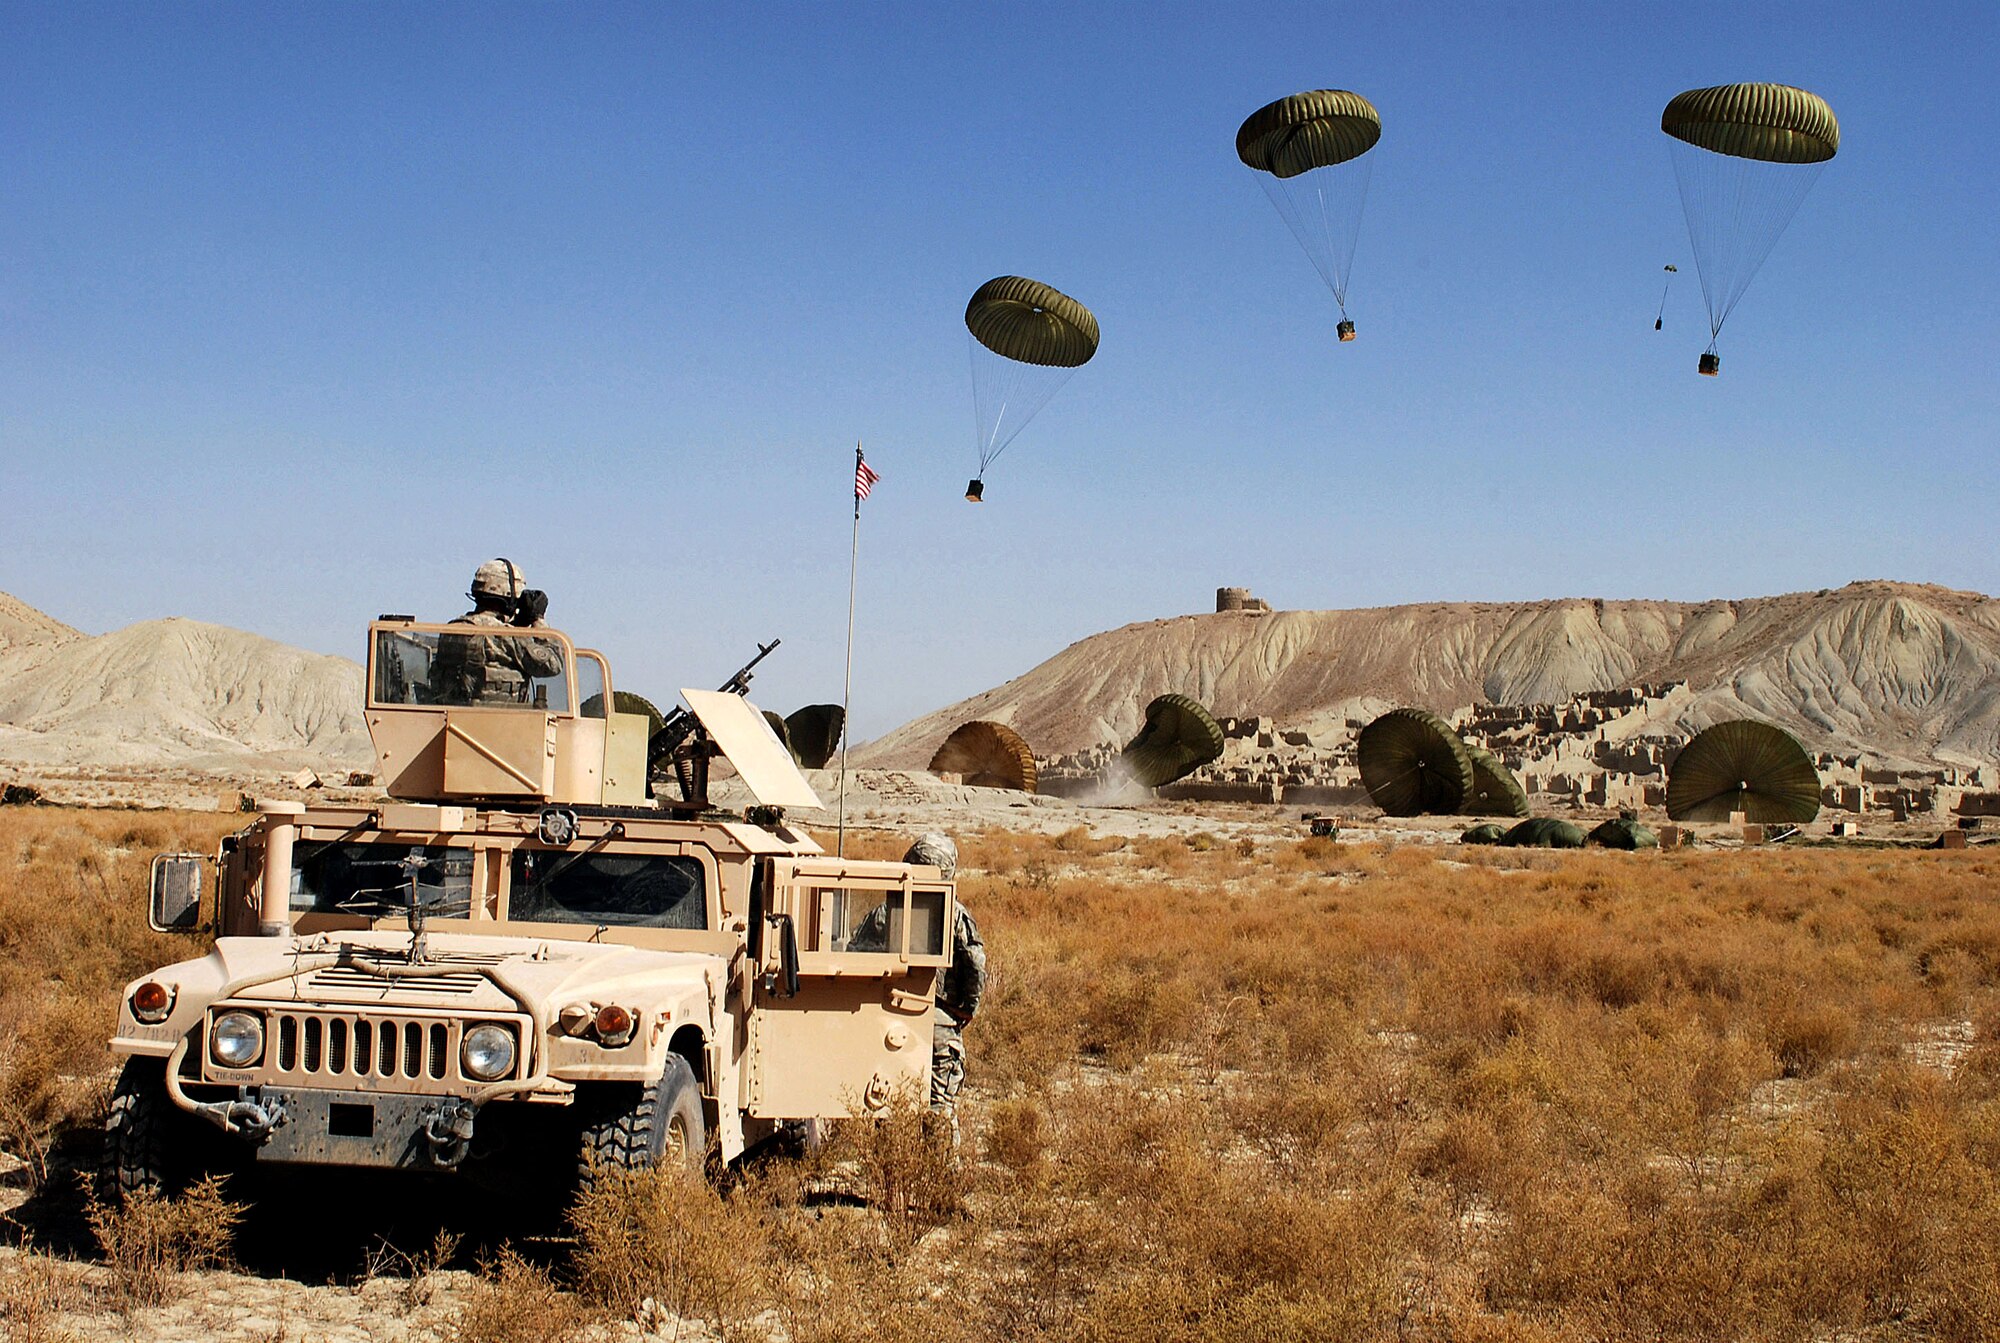 Paratroopers from the 782nd Brigade Support Battalion, 4th Brigade Combat Team, 82nd Airborne Division watch as C-17 Globemaster IIIs air drop combat cargo bundles carrying food and water in Paktika Province, Afghanistan, October 11. (U.S. Army photo/Spc. Micah E. Clare)